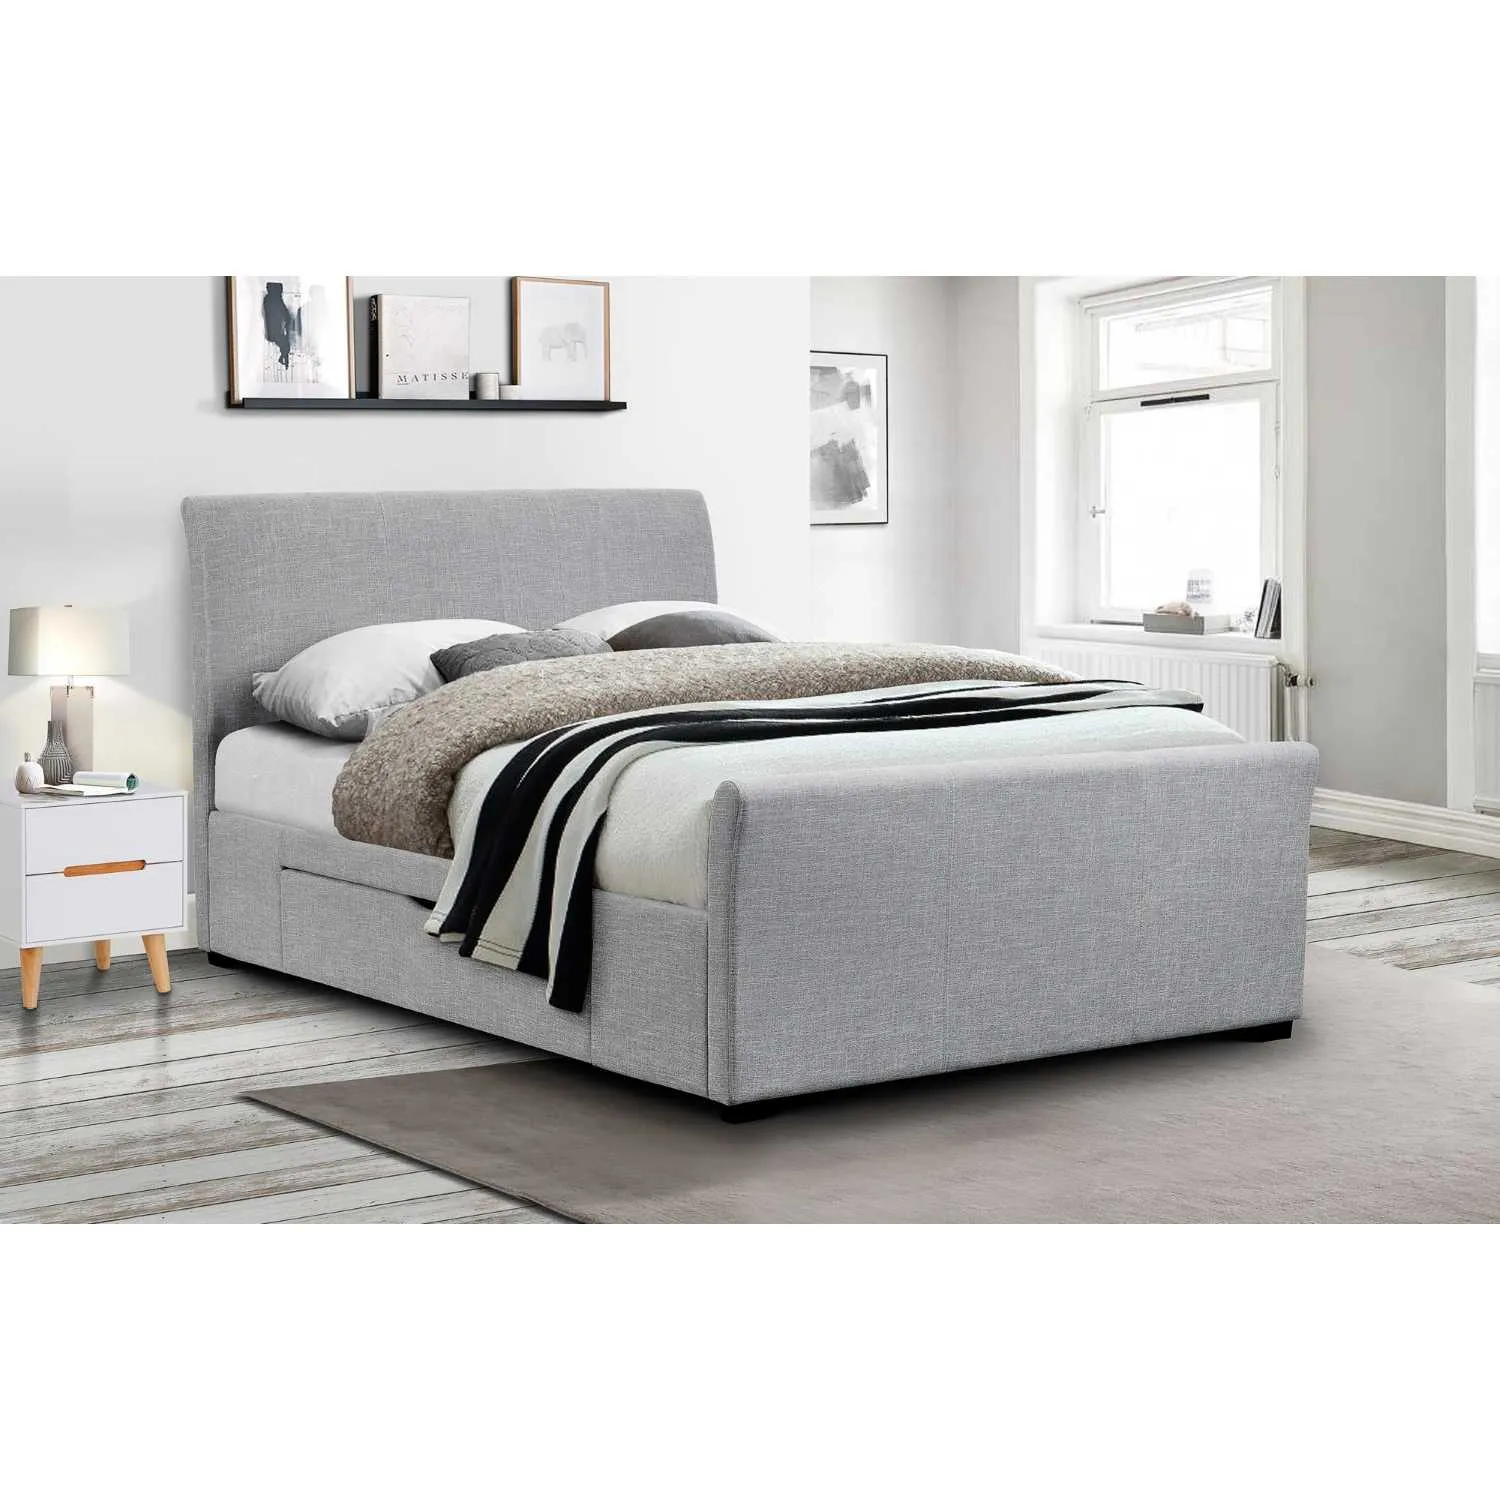 Light Grey Upholstered King Size Curved Fabric Bed With Drawers 150cm 5ft